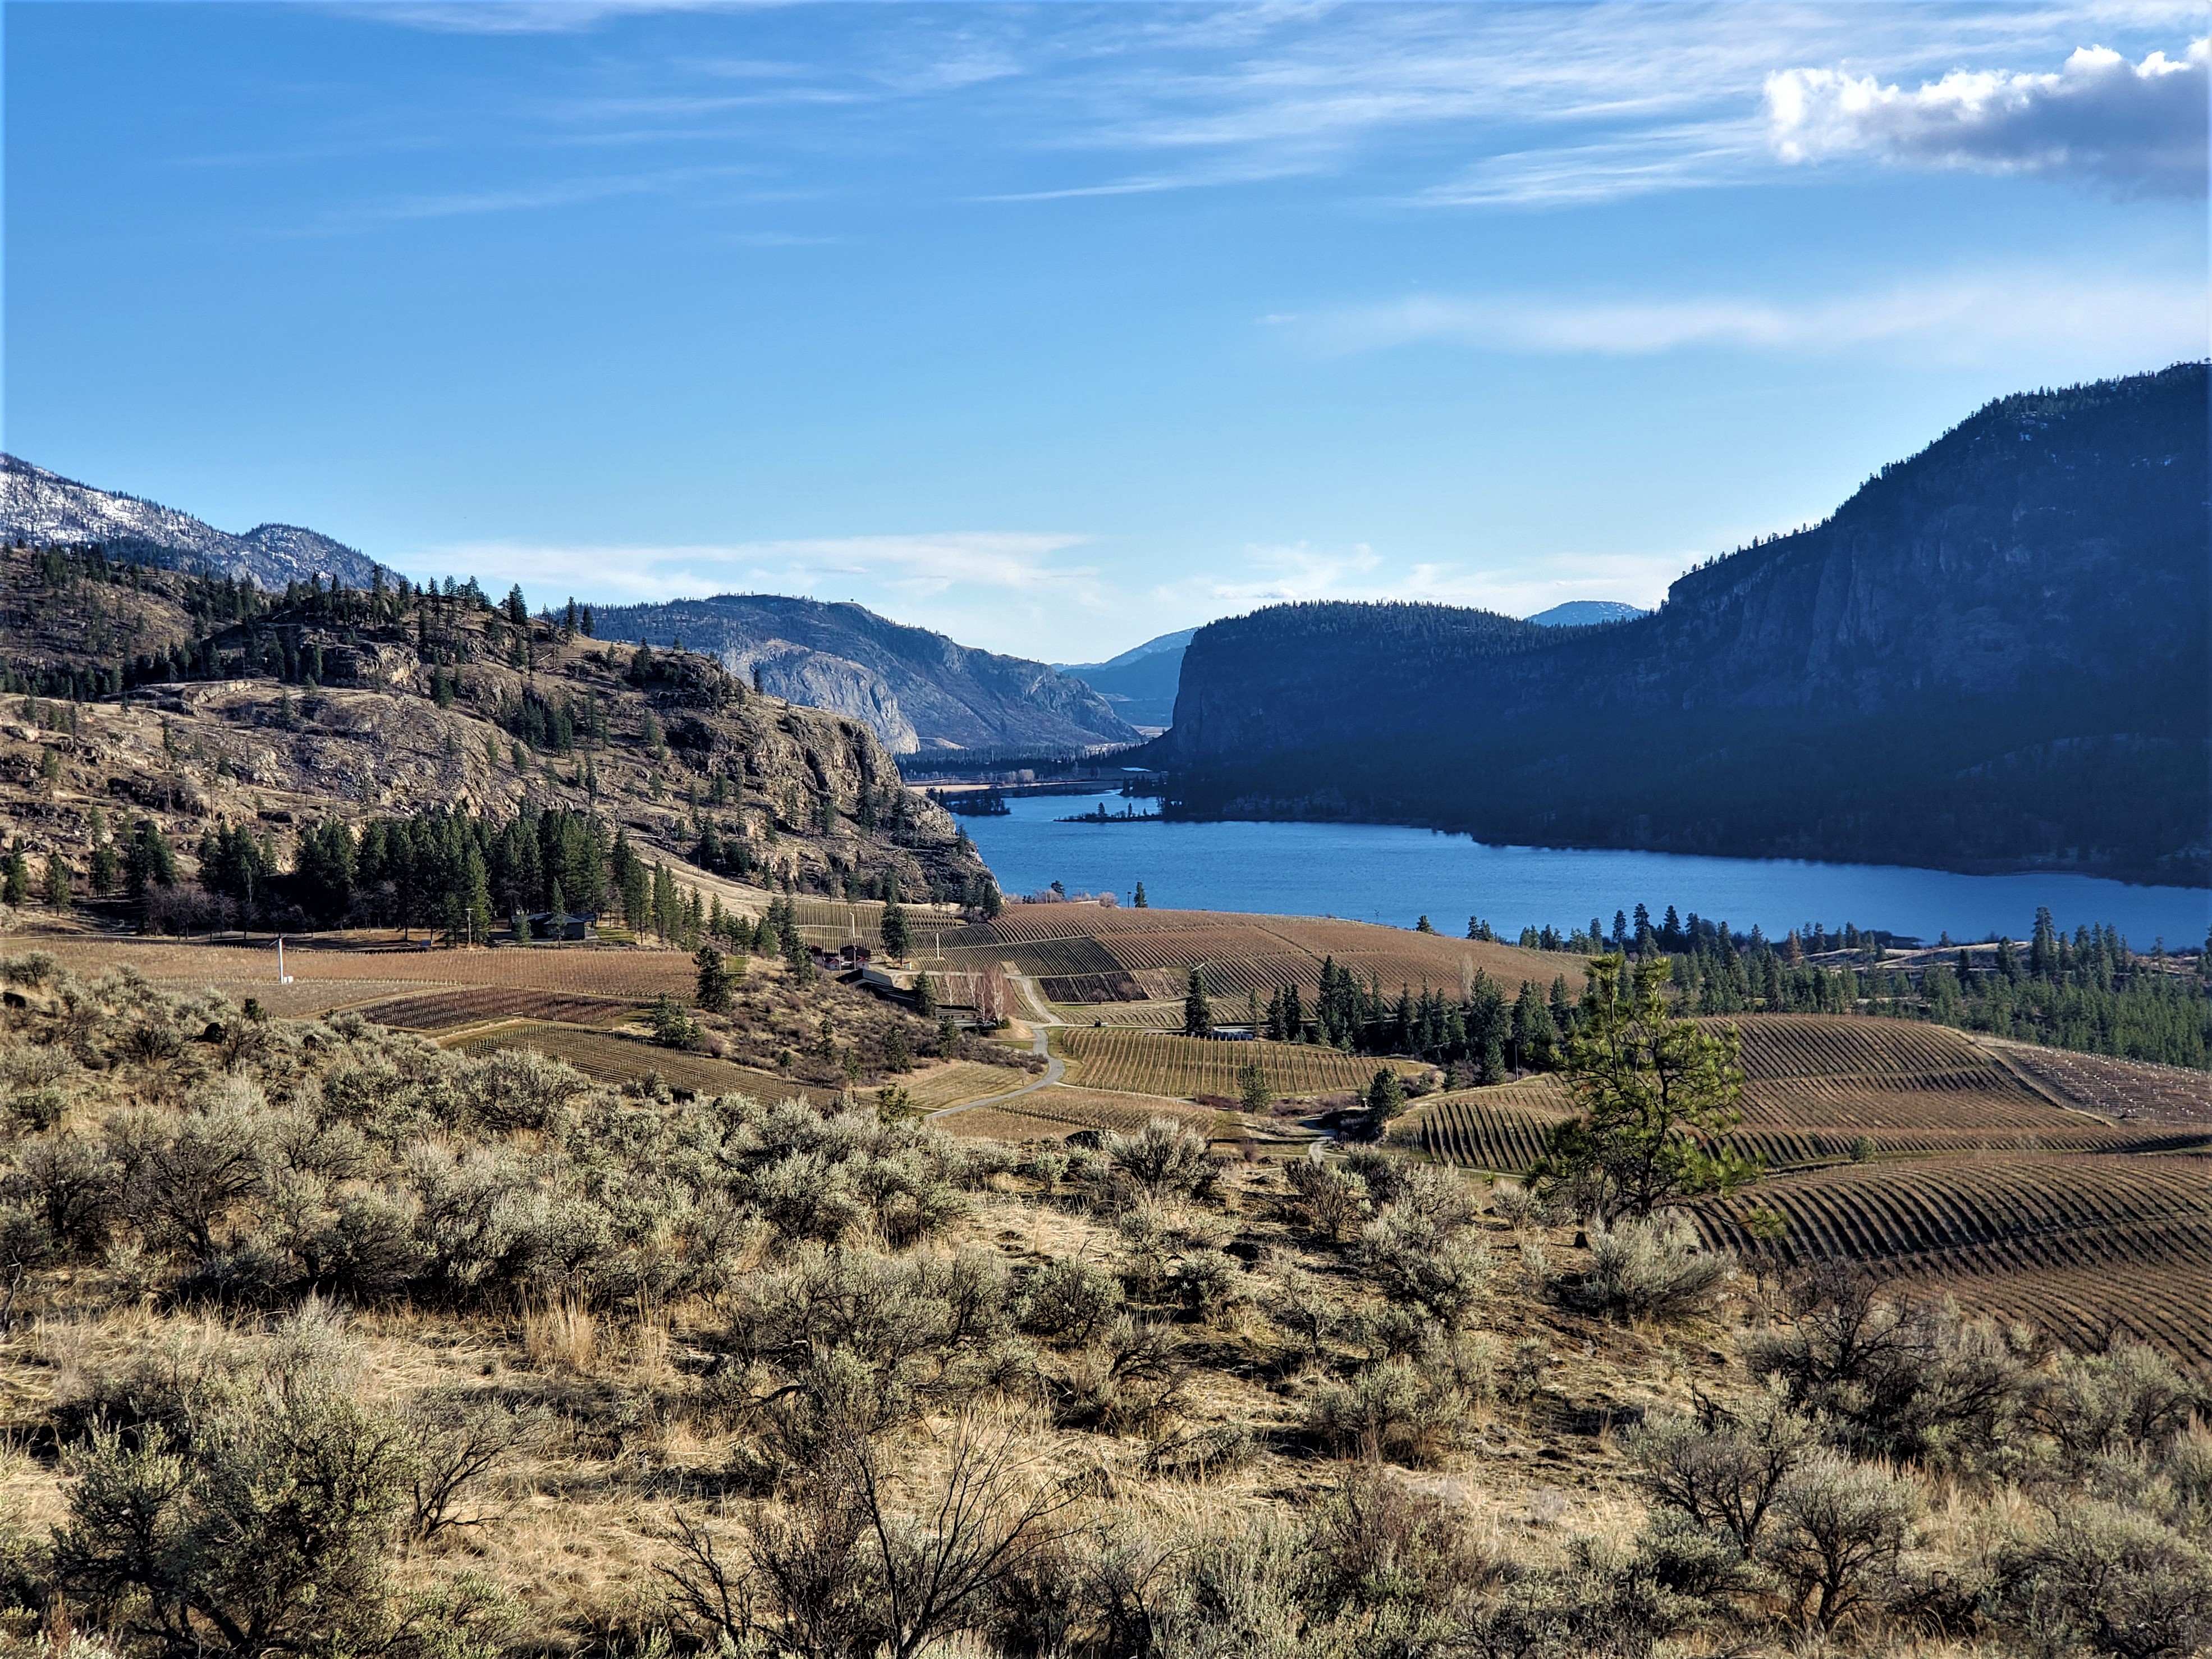 Okanagan Falls receives a significant infrastructure investment